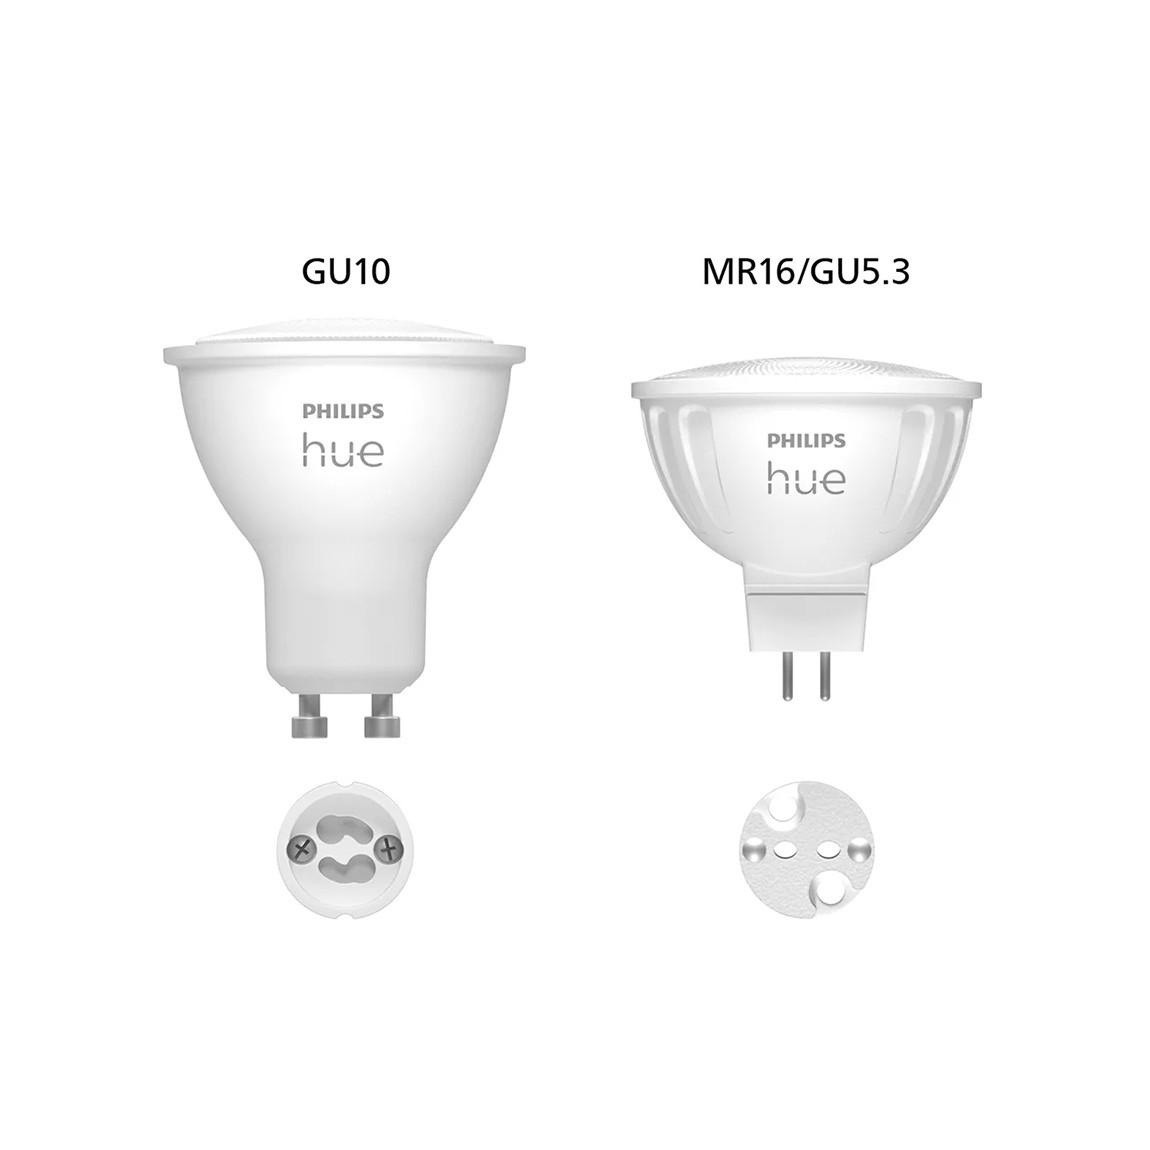 Philips Hue White & Col. Amb. MR16 LED Lampe Doppelpack 2x400lm - Weiß_fassung